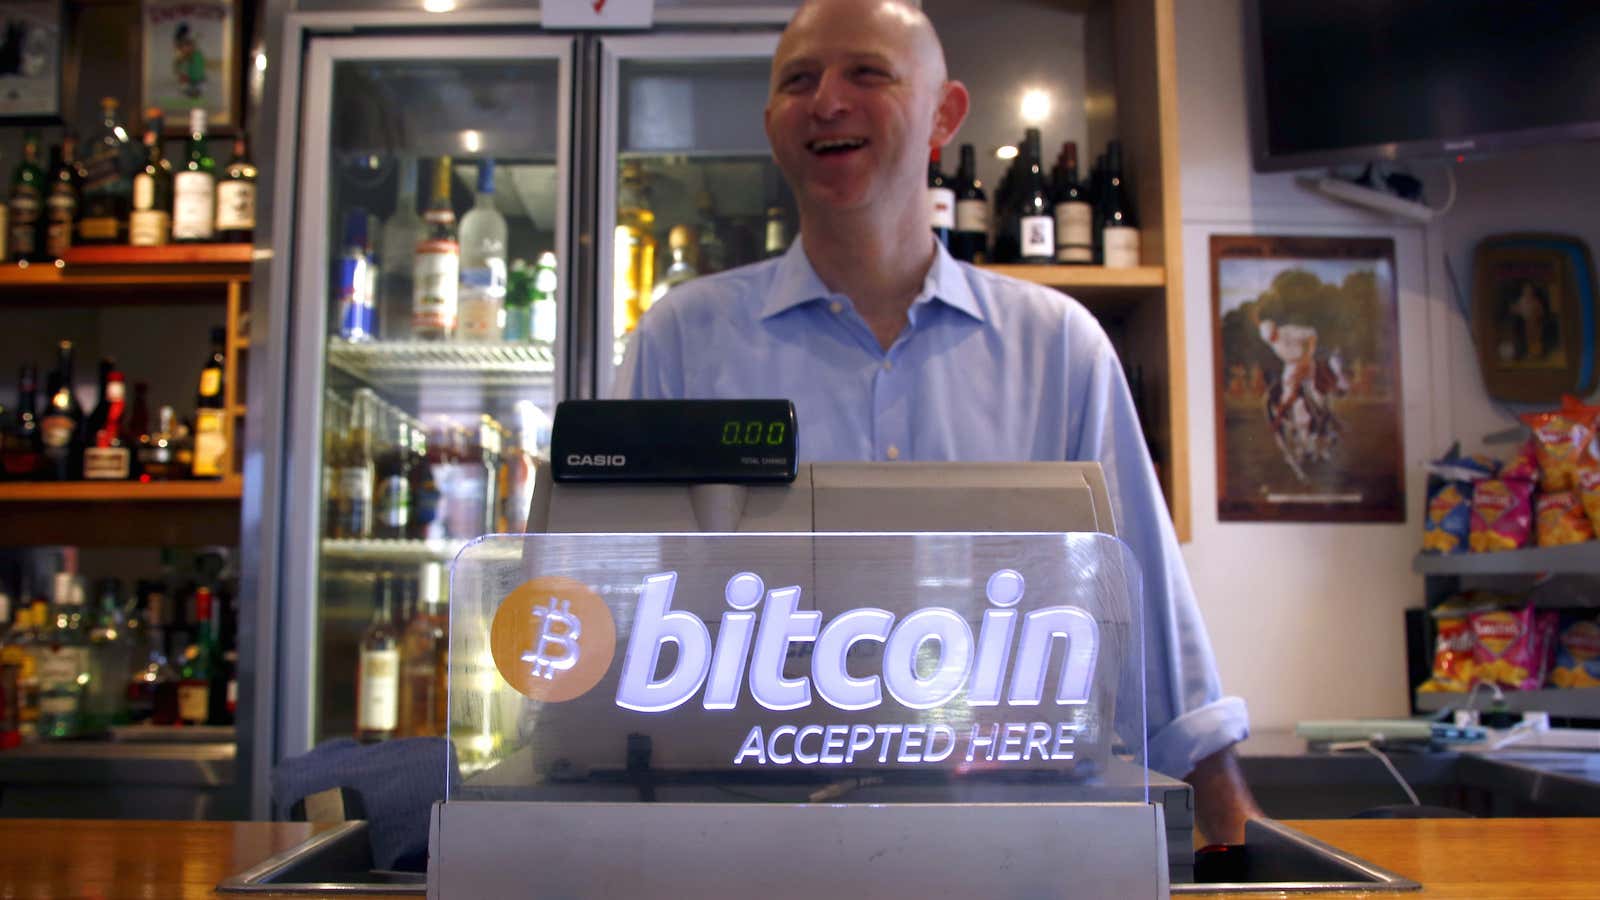 You’ll be able to use bitcoin in more stores, thanks to Coinbase.